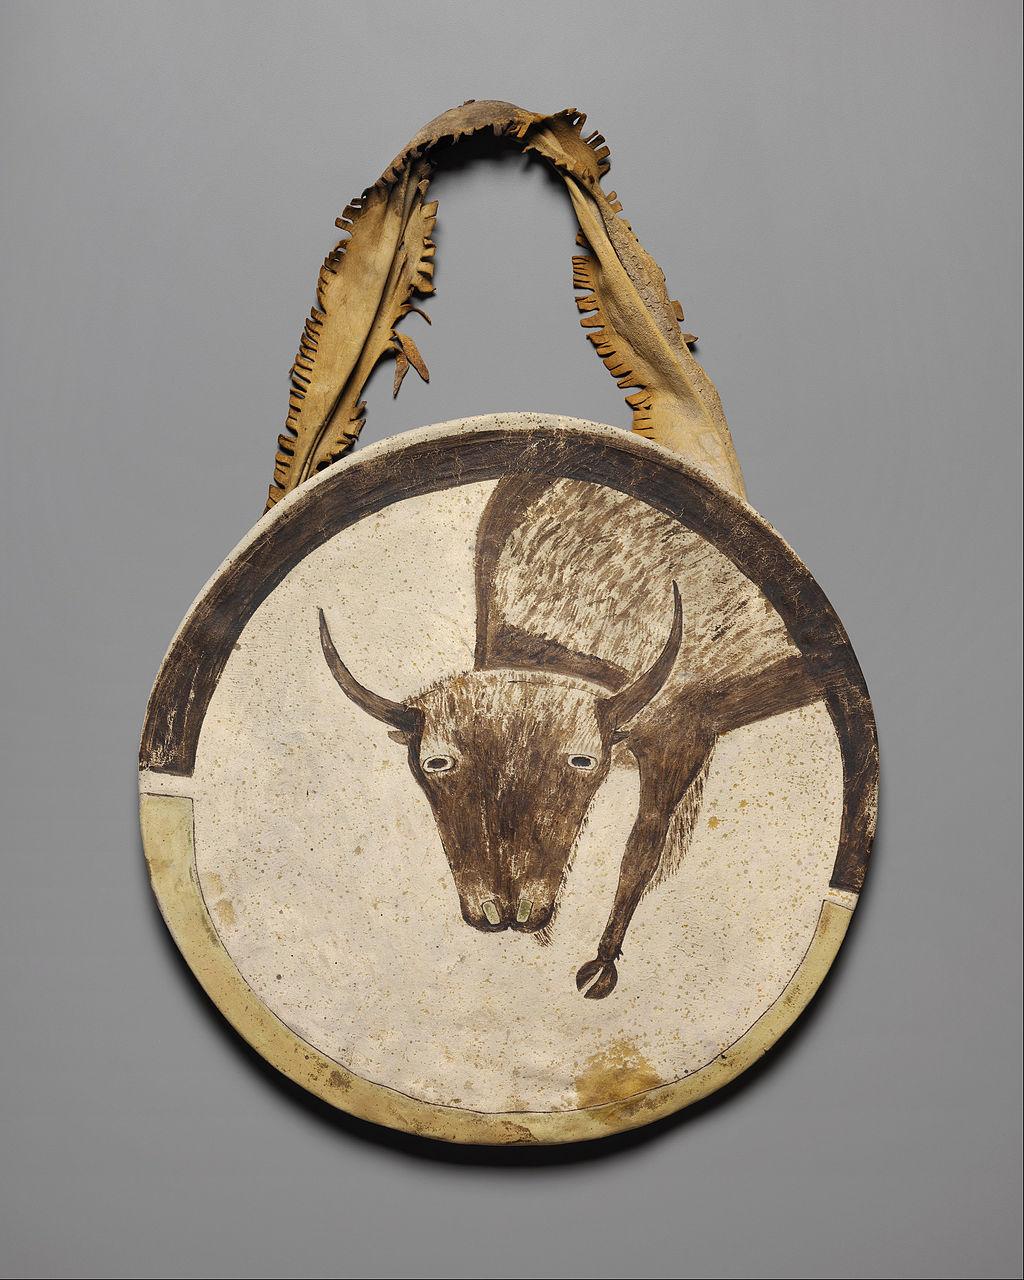 A file photo of a rawhide shield, ca. 1850, at the Nelson-Atkins Museum of Art. (<a href="https://commons.wikimedia.org/wiki/File:Shield_-_Google_Art_Project.jpg" target="_blank">Public Domain</a>)